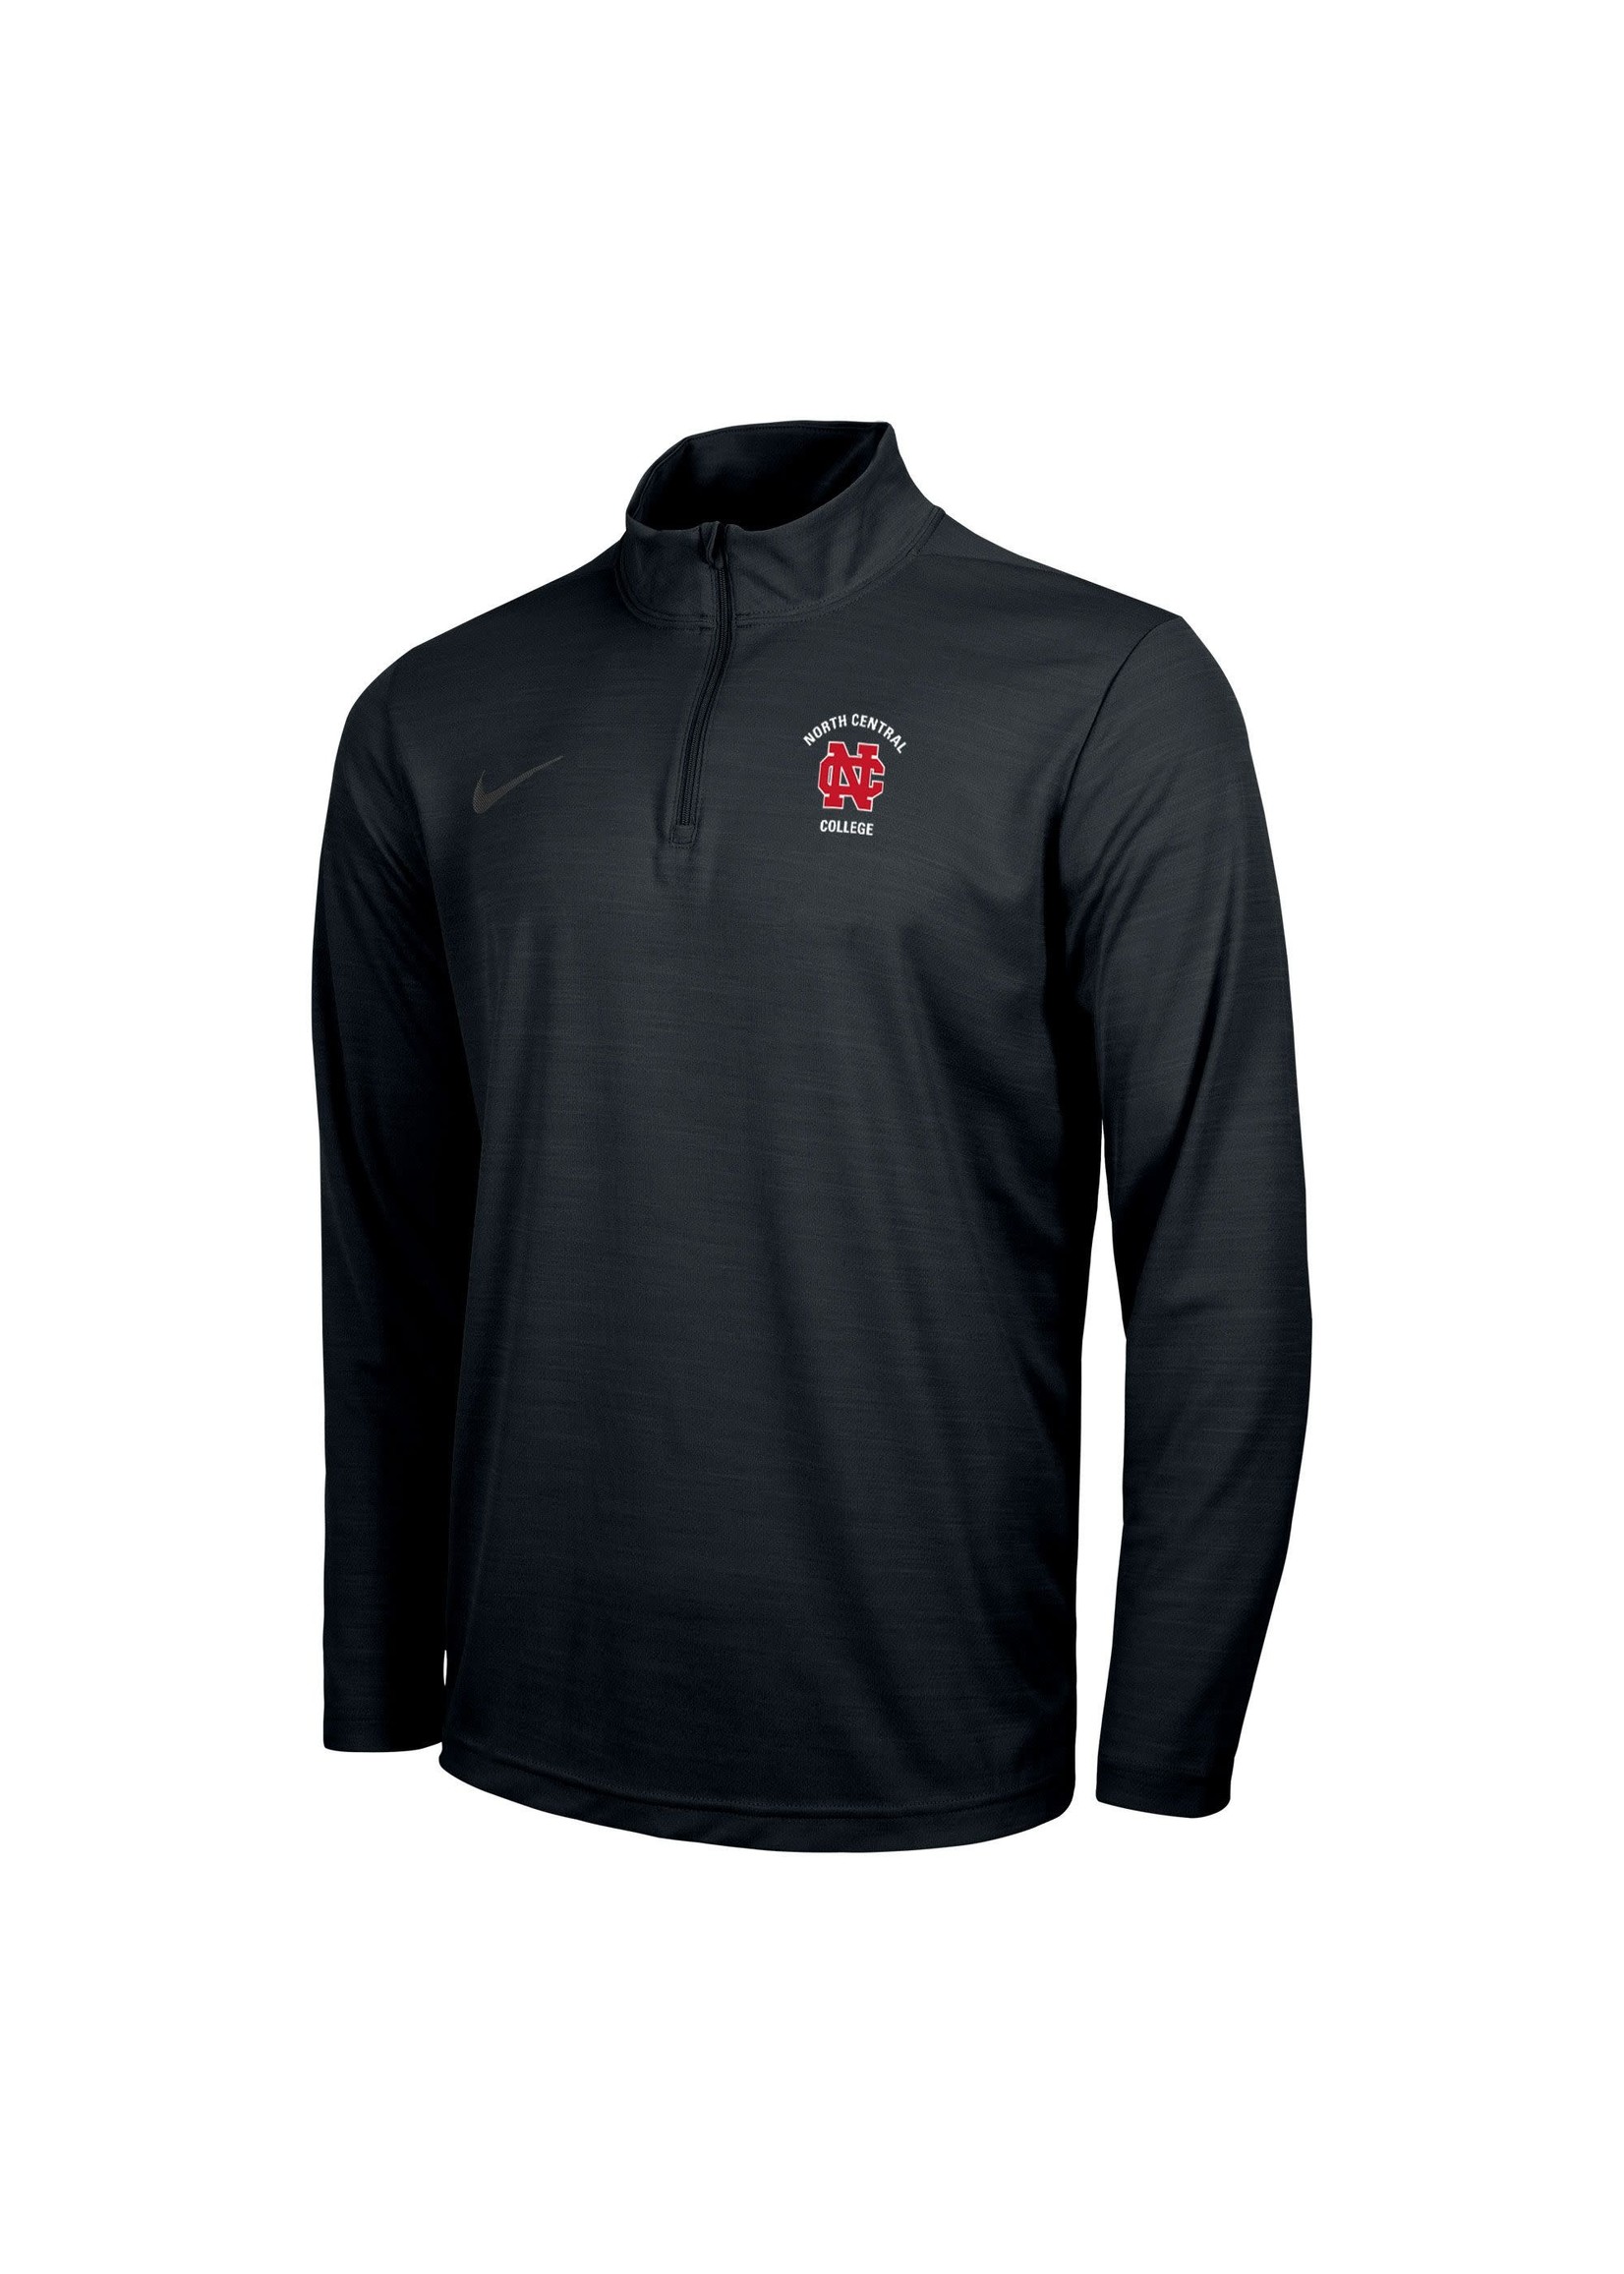 Nike NCC Pacer 1/4 Zip F22 w/embroidered logo